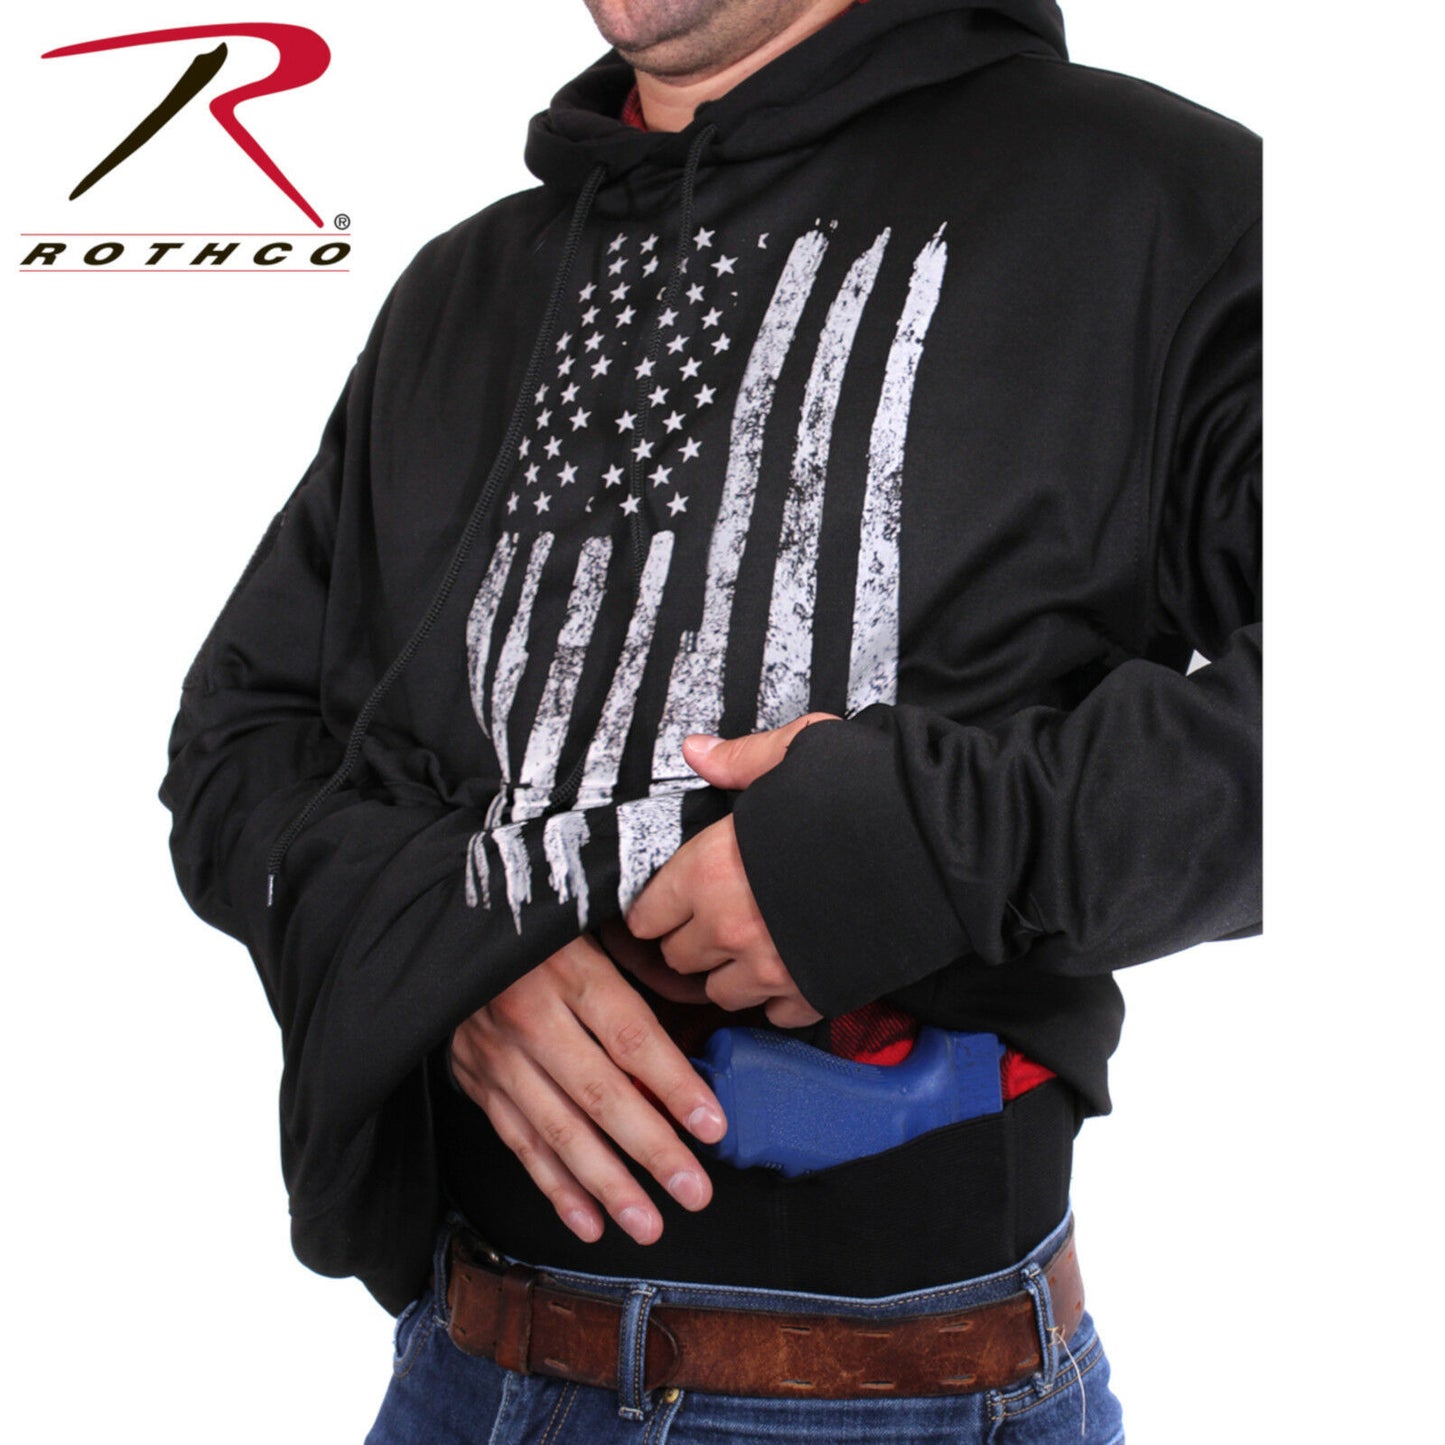 Rothco Men's Black Concealed Carry Hoodie With Distressed US Flag